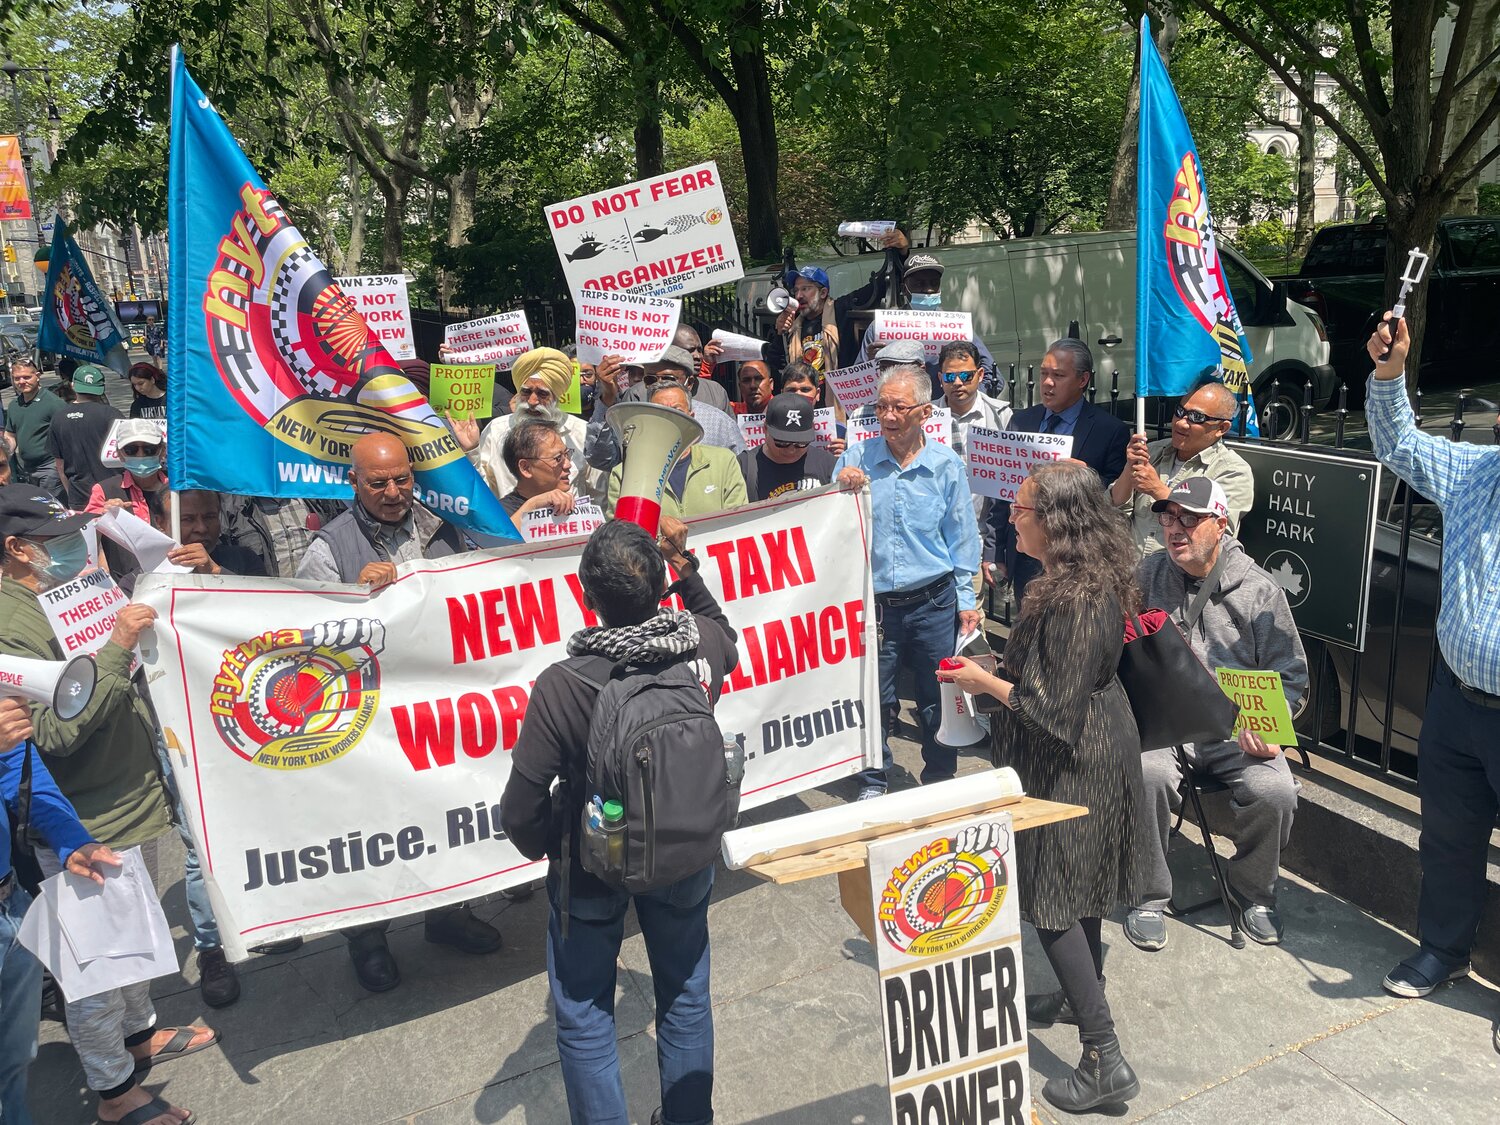 Members of the New York Taxi Workers Alliance, including its executive director, Bhairavi Desai, at right in the foreground, gathered May 11 outside the City Hall gates on Broadway to protest what Taxi and Limousine Commission pilot program that is expected to place 2,500 no-hail vehicles in the outer boroughs and northern Manhattan.